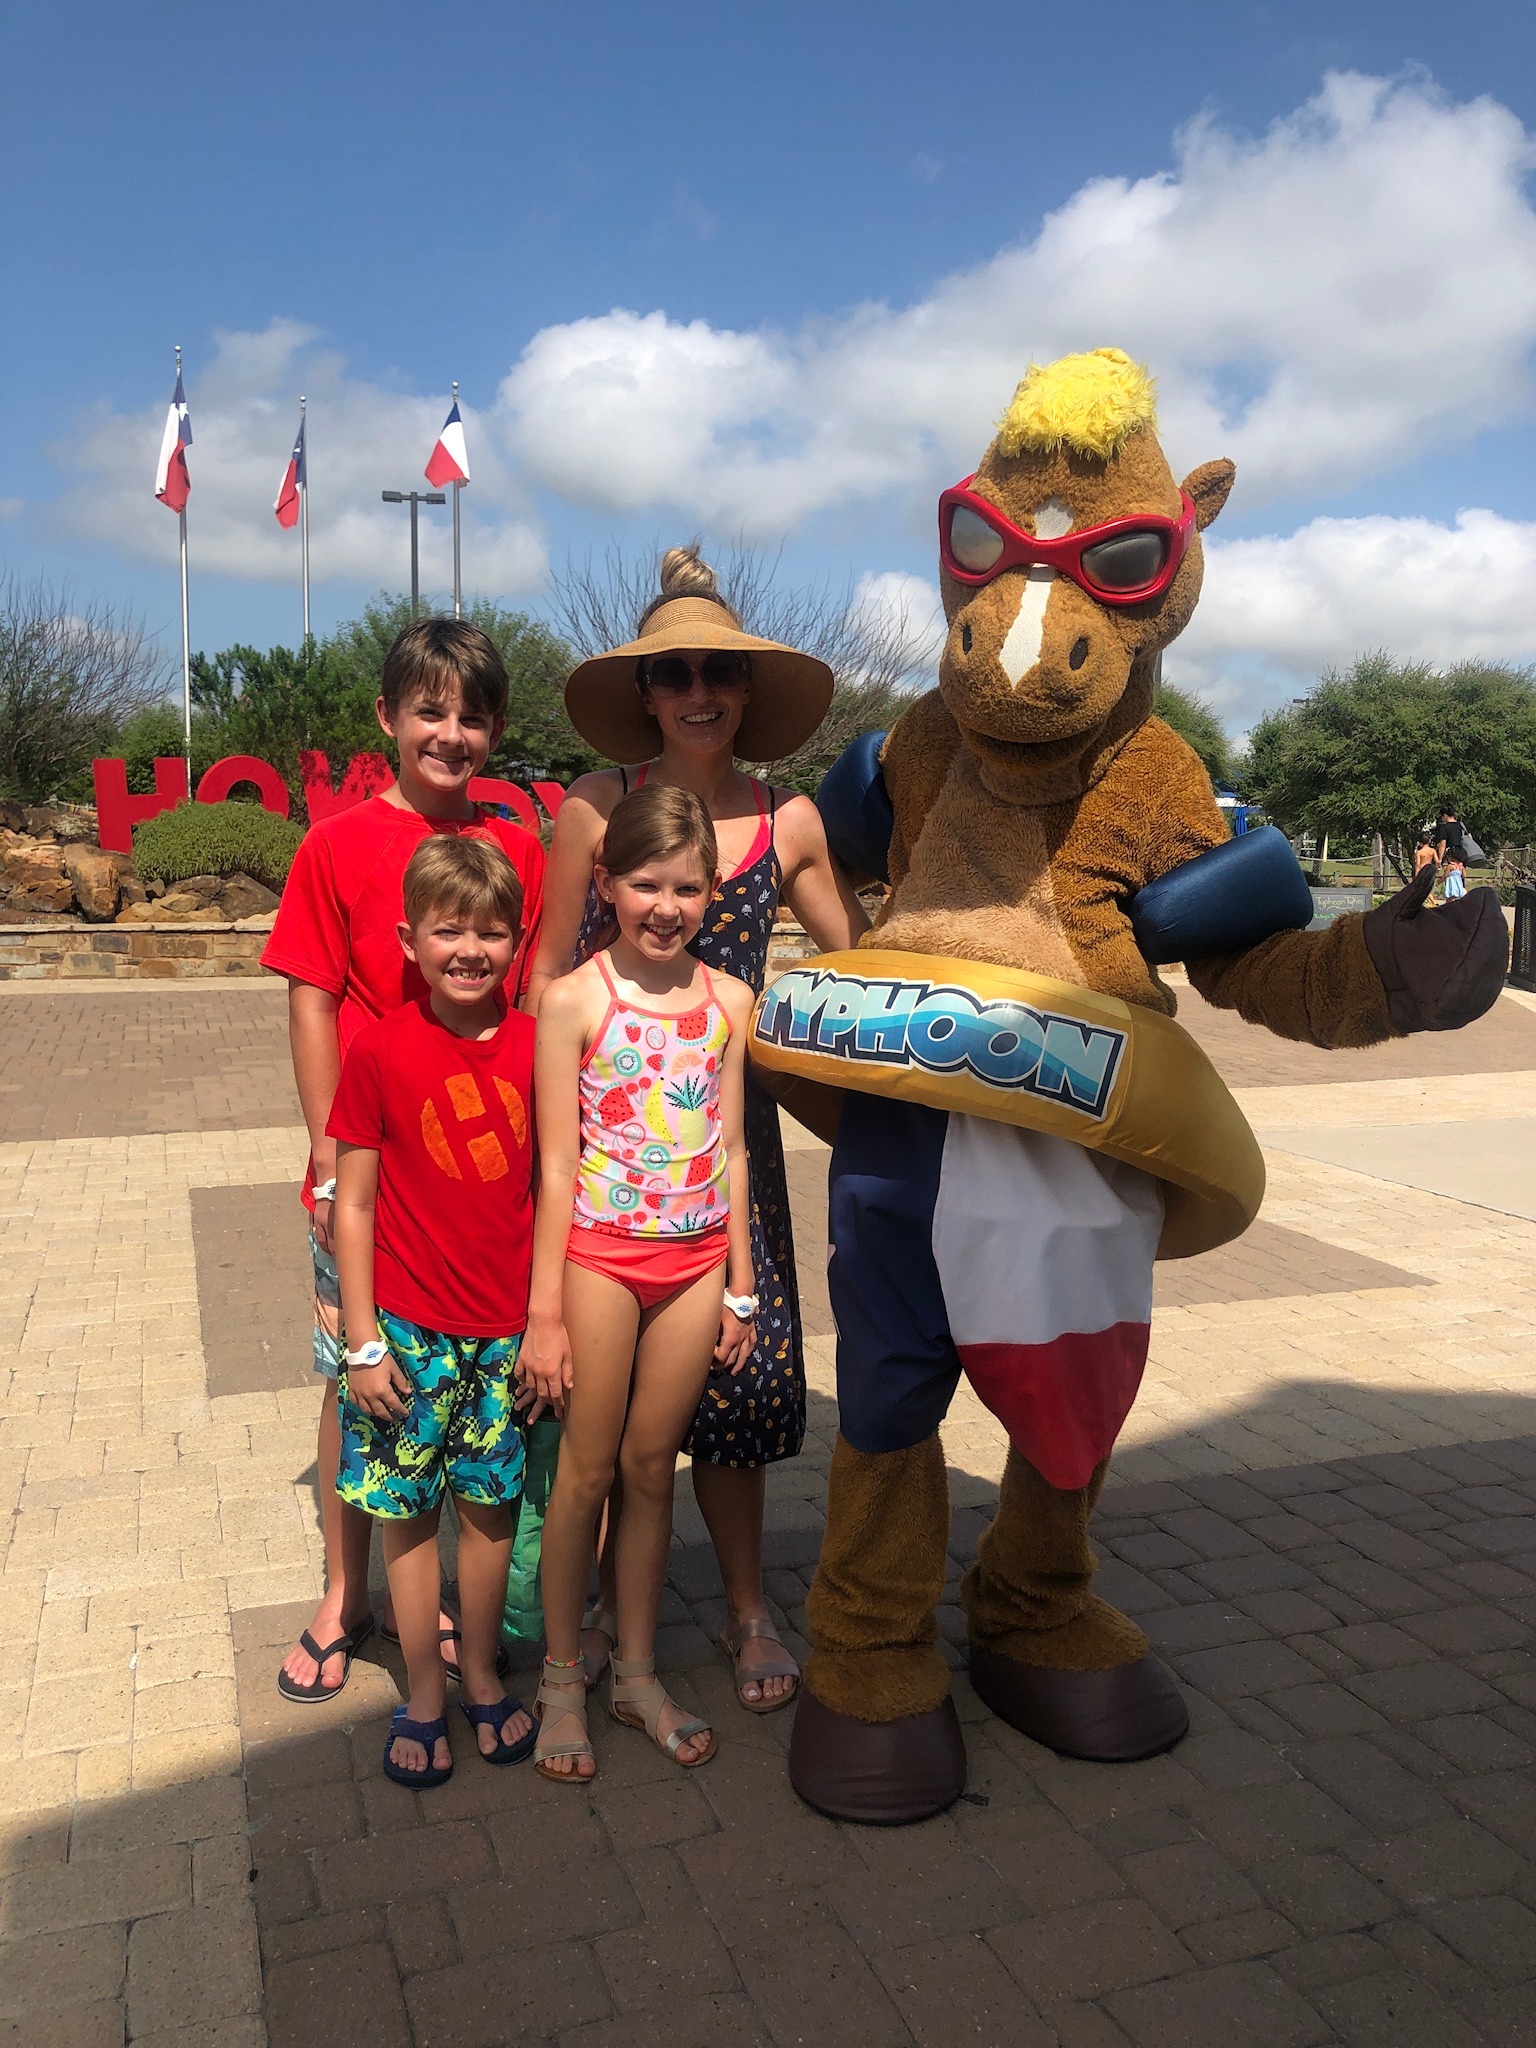 Family at Typhoon Texas waterpark with their mascot